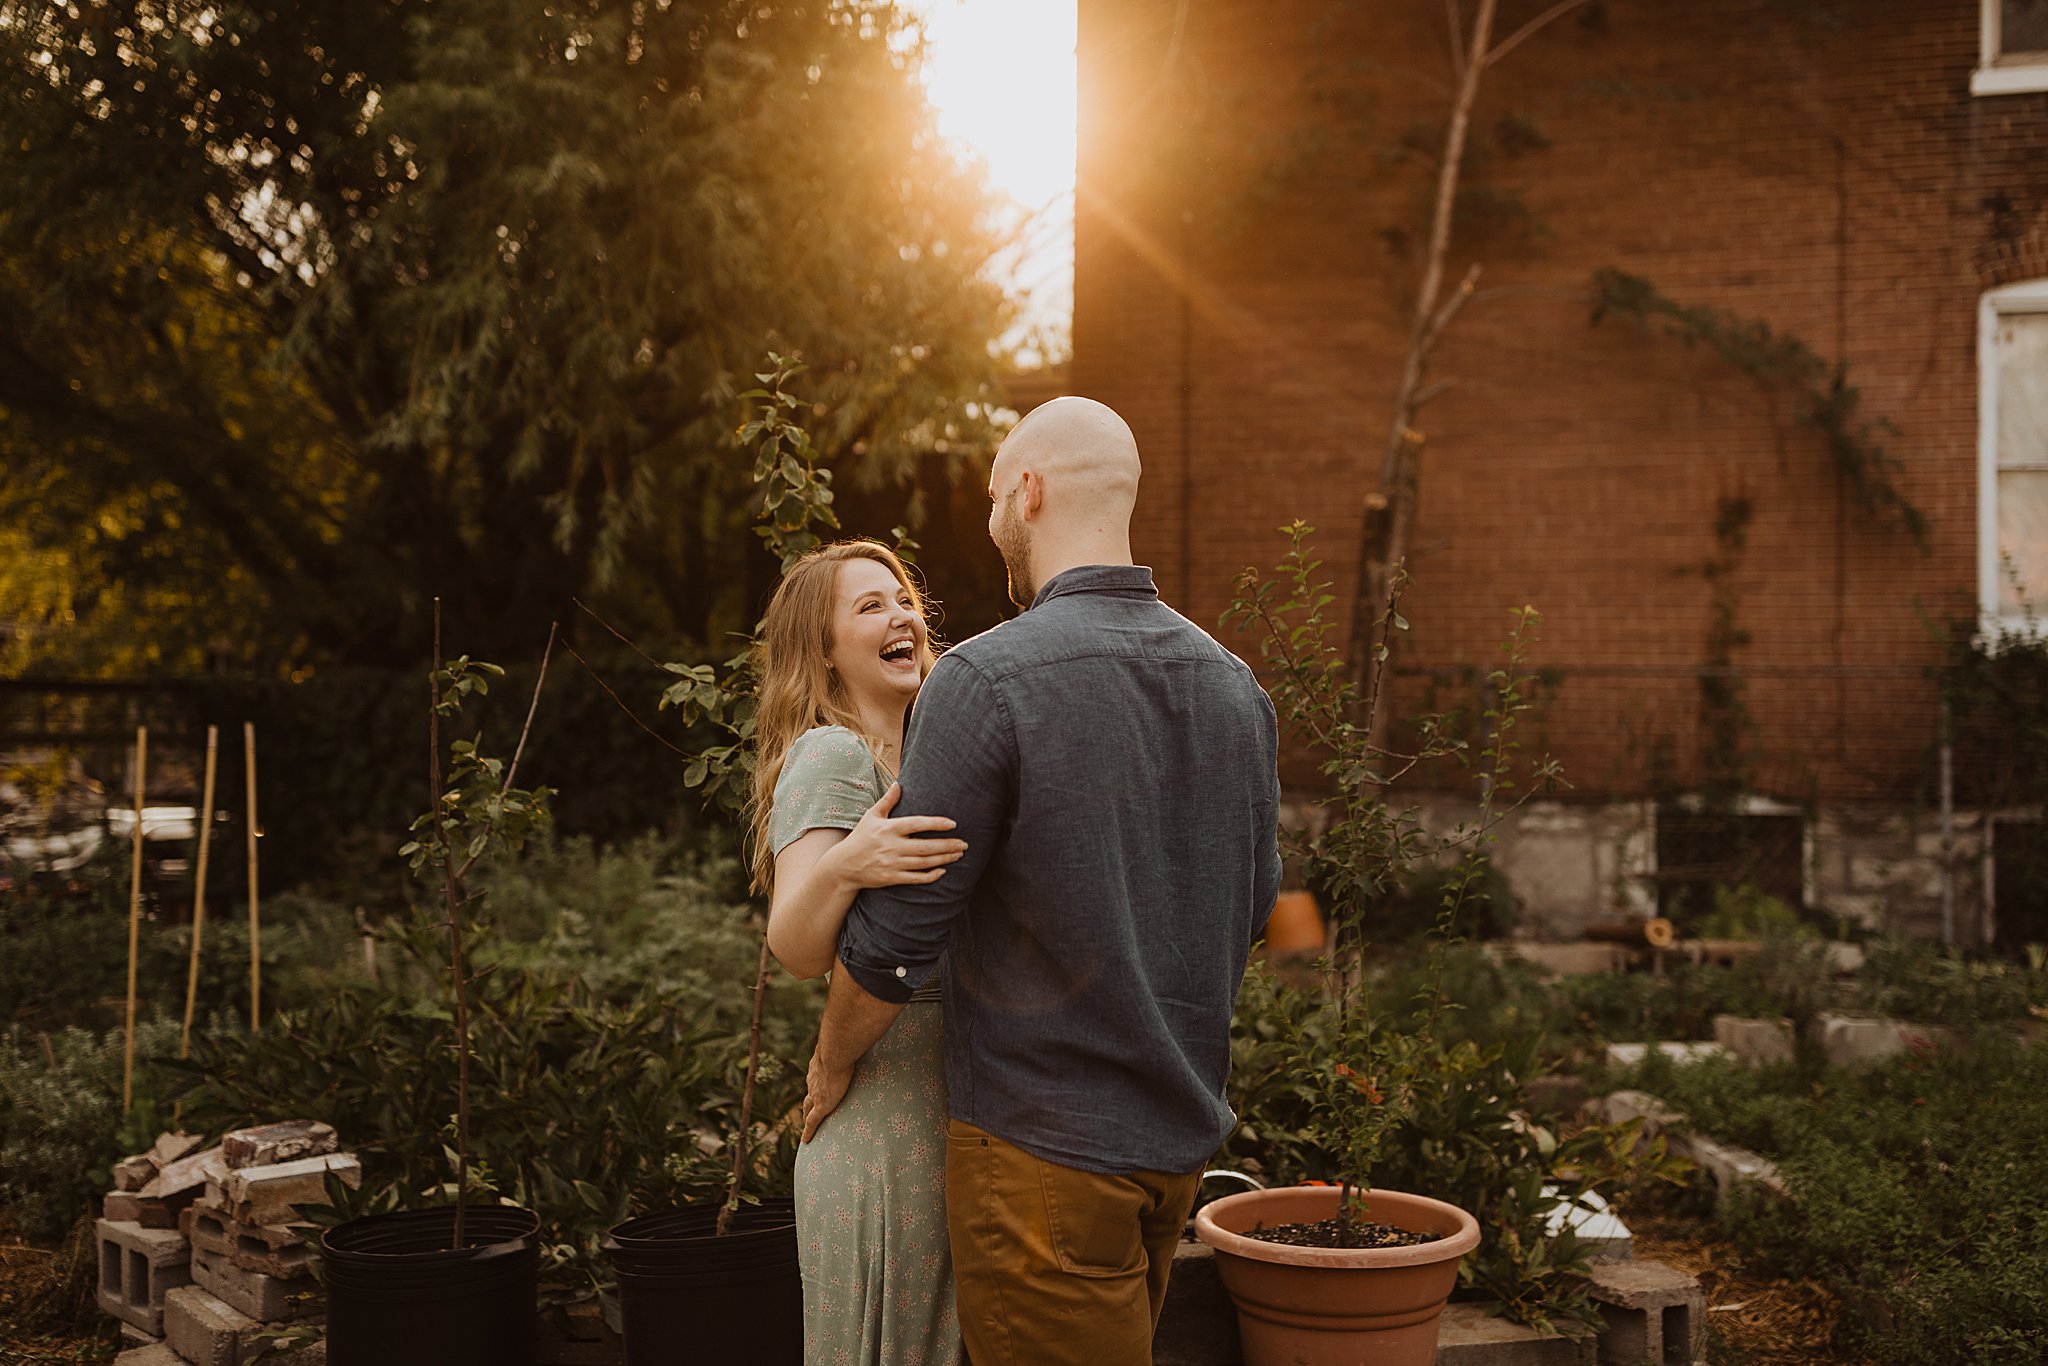 Flowers & Weeds Engagement Photos in St. Louis